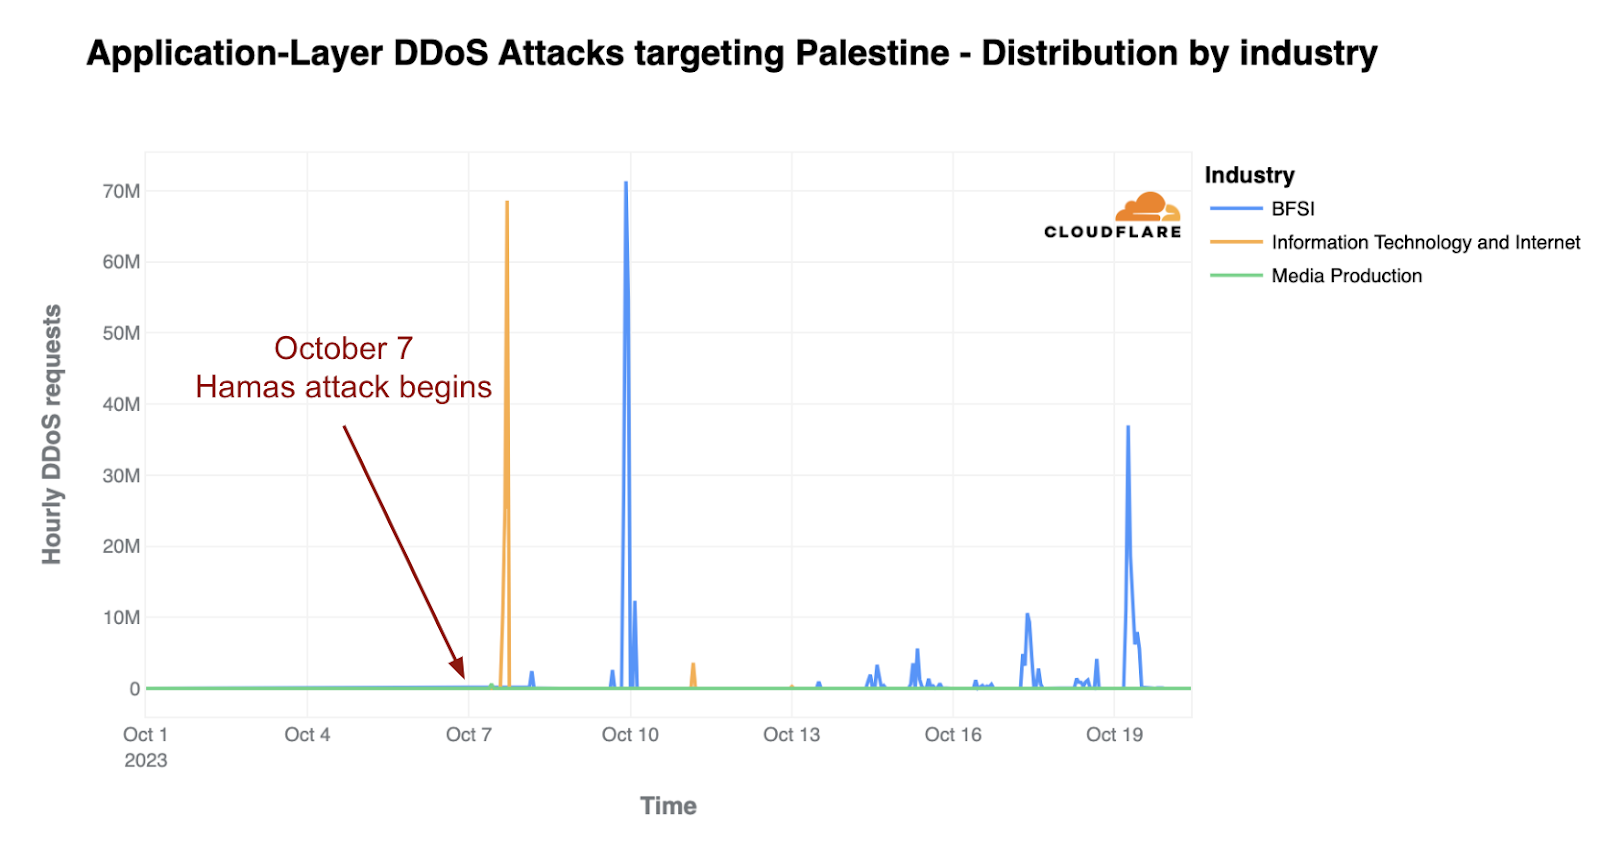 HTTP DDoS attacks against Palestinian websites using Cloudflare by industry